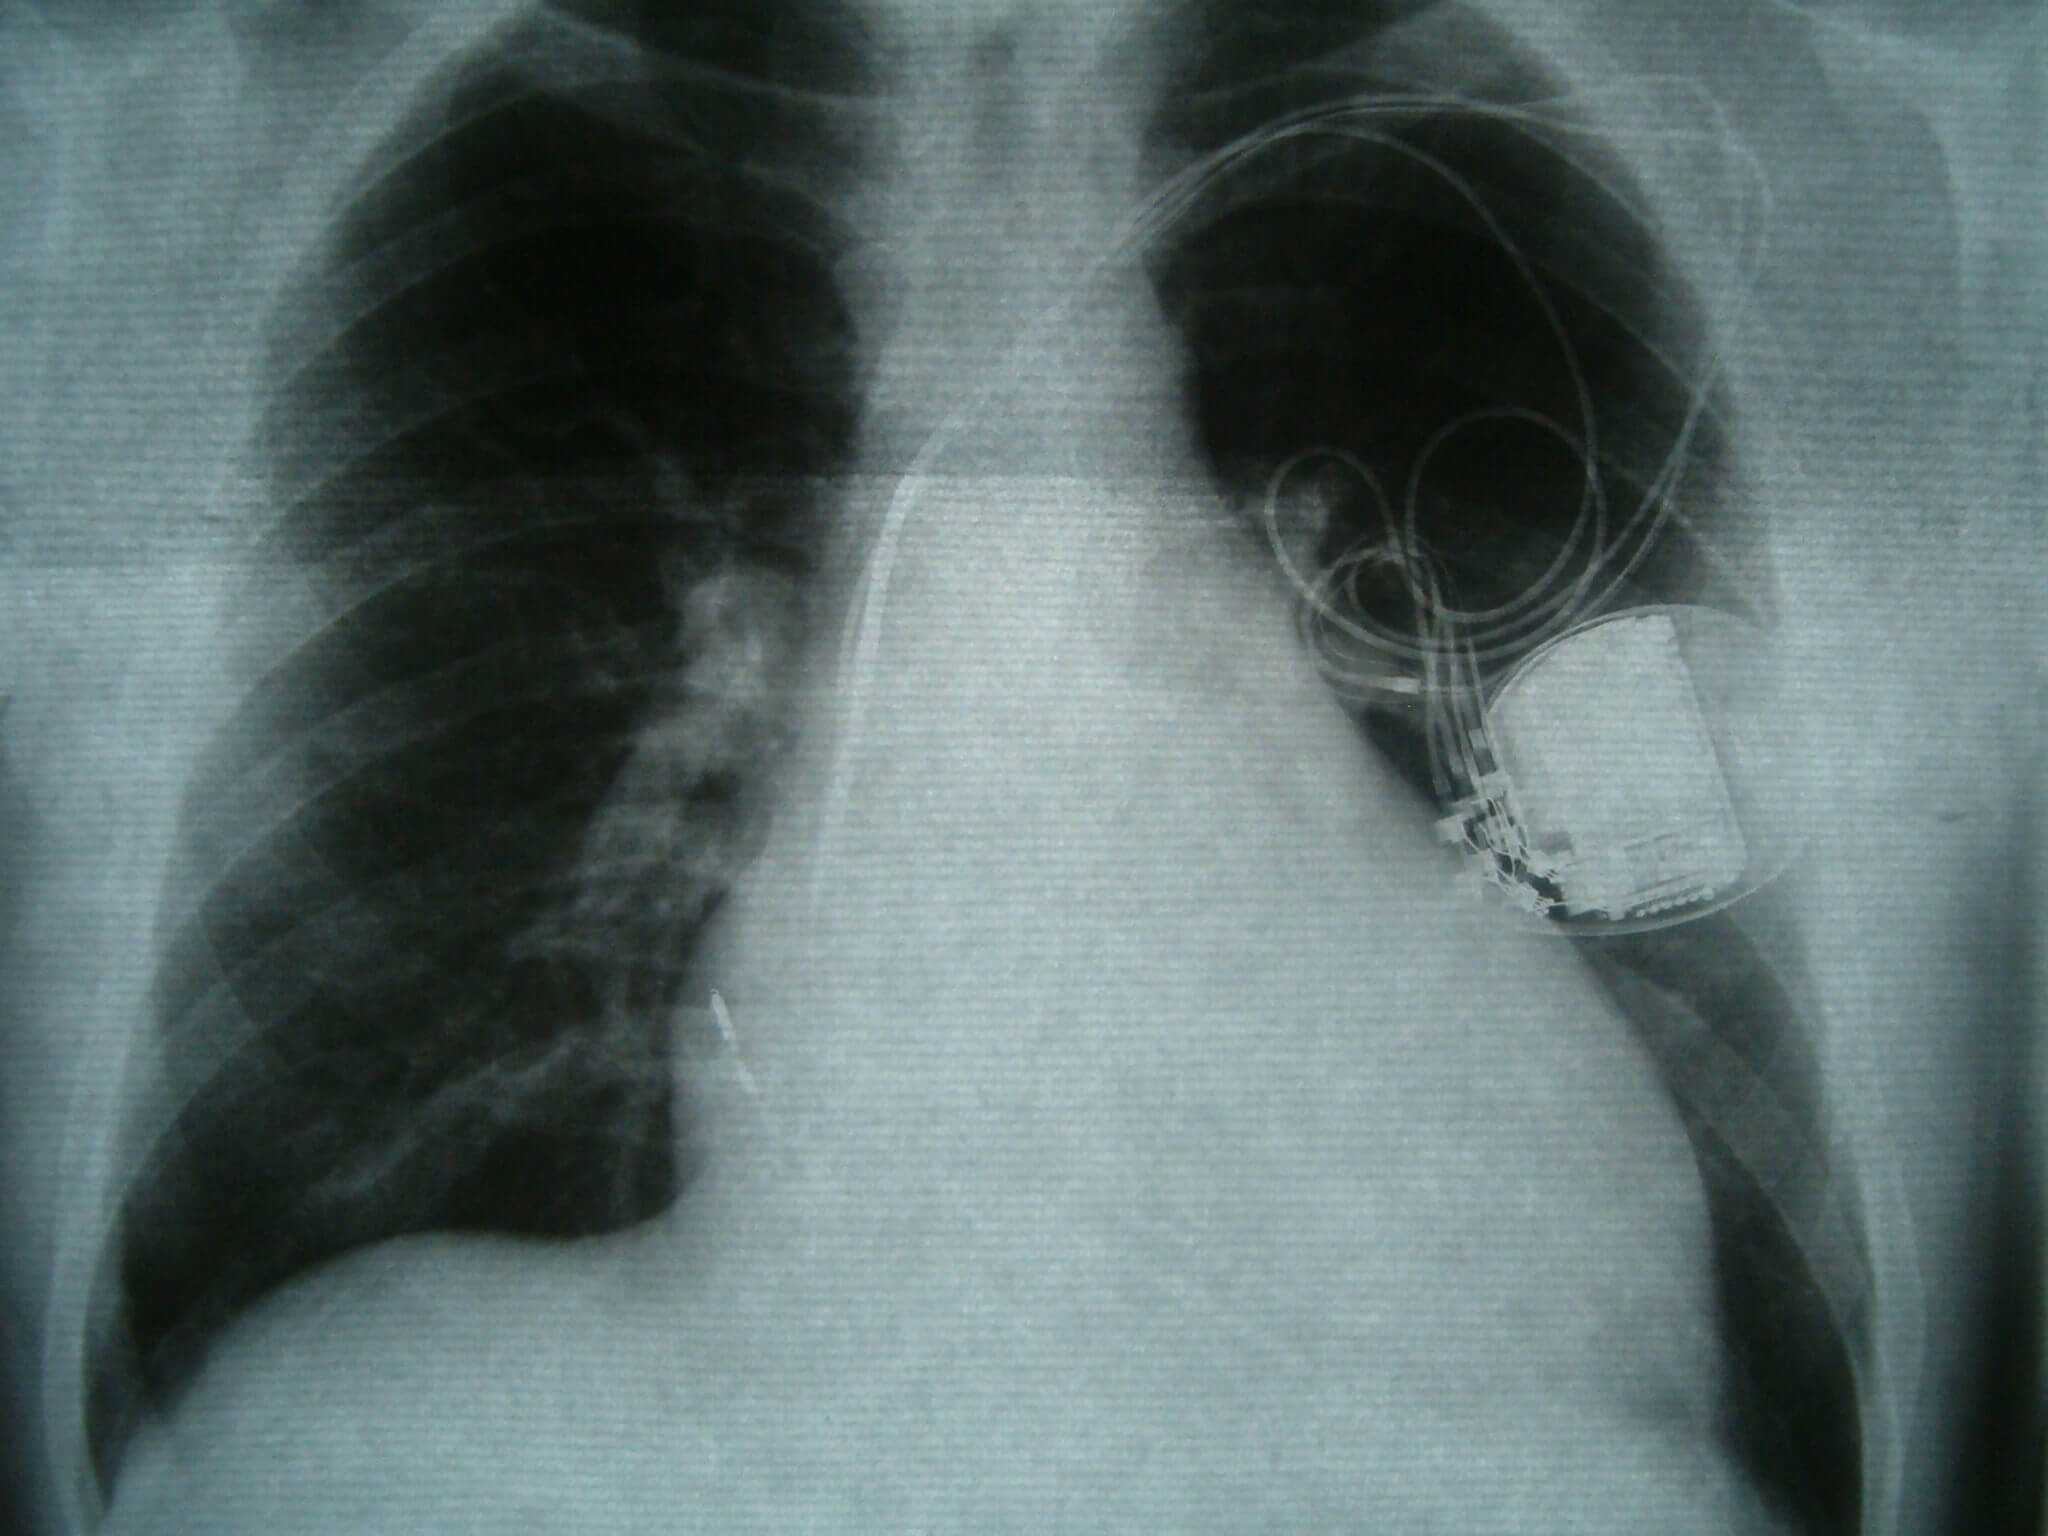 X-ray of person with medical device in them